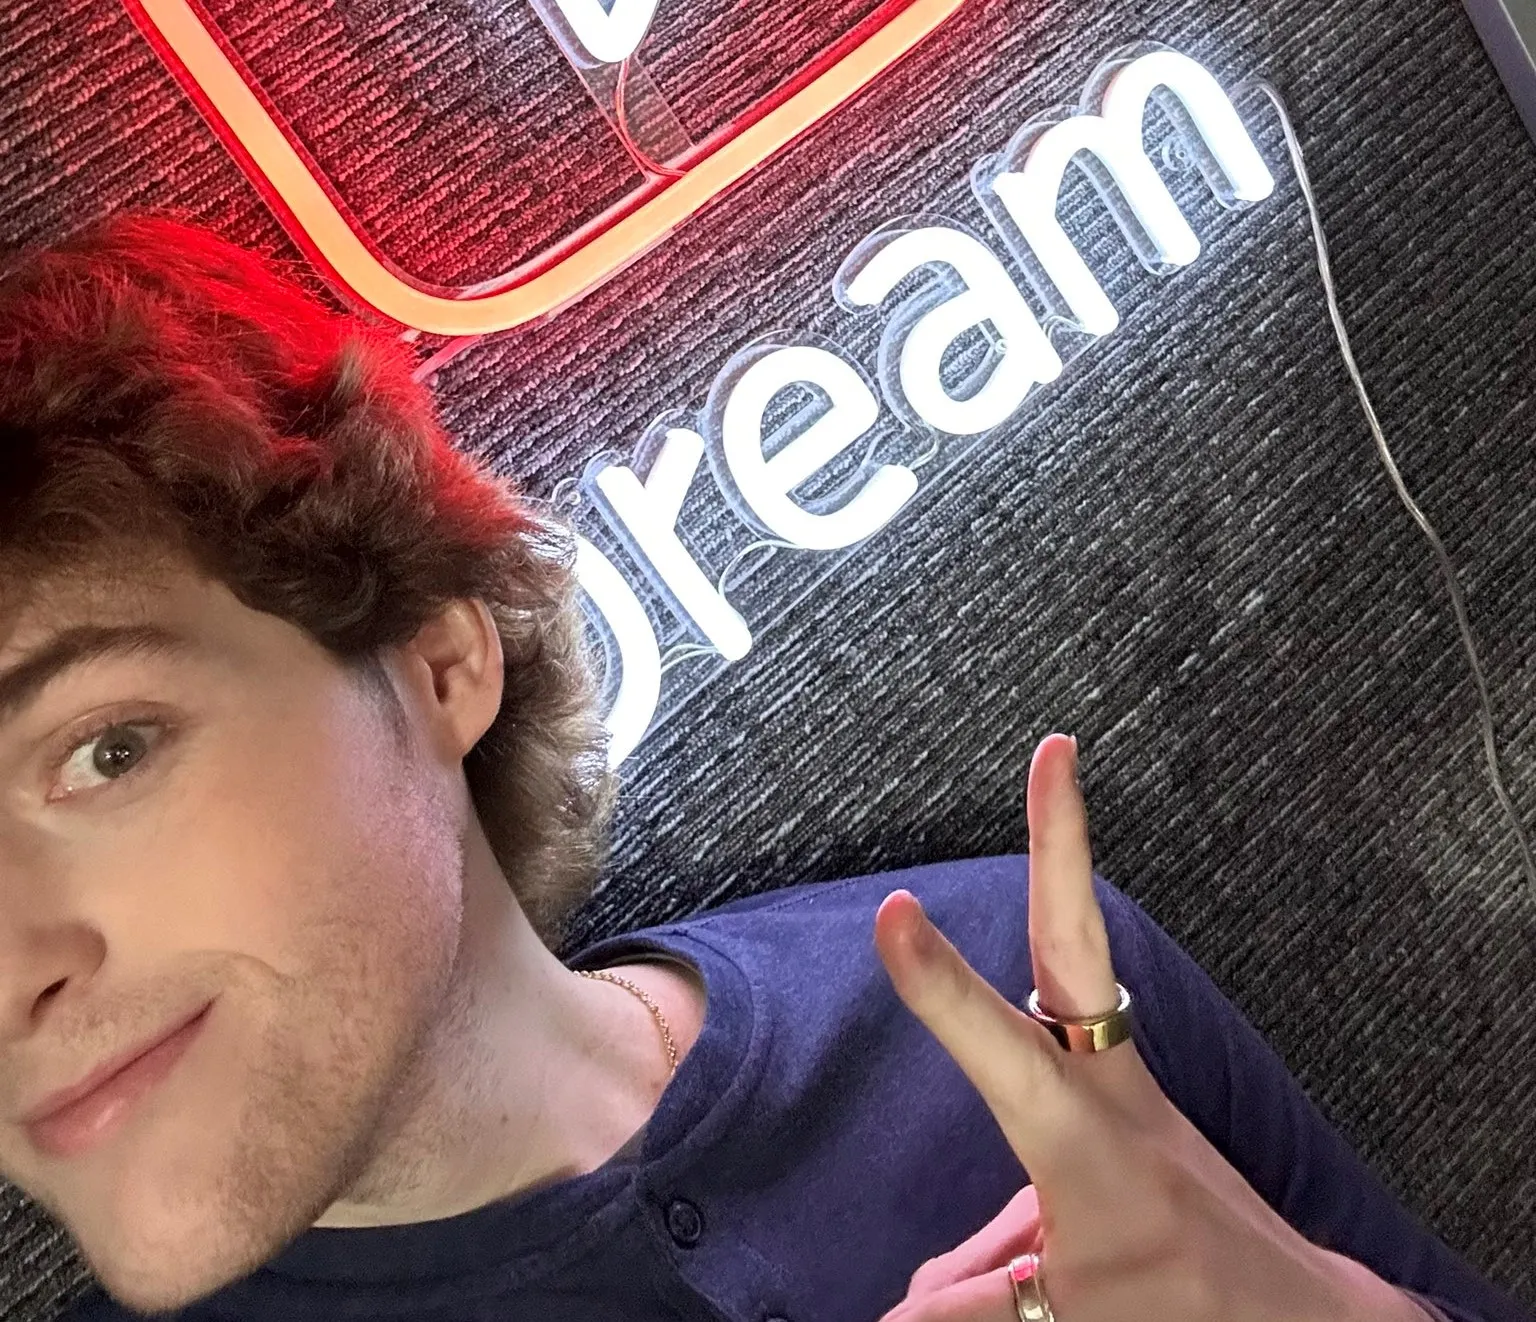 Dream's face reveal revolutionized the future of his channel – The